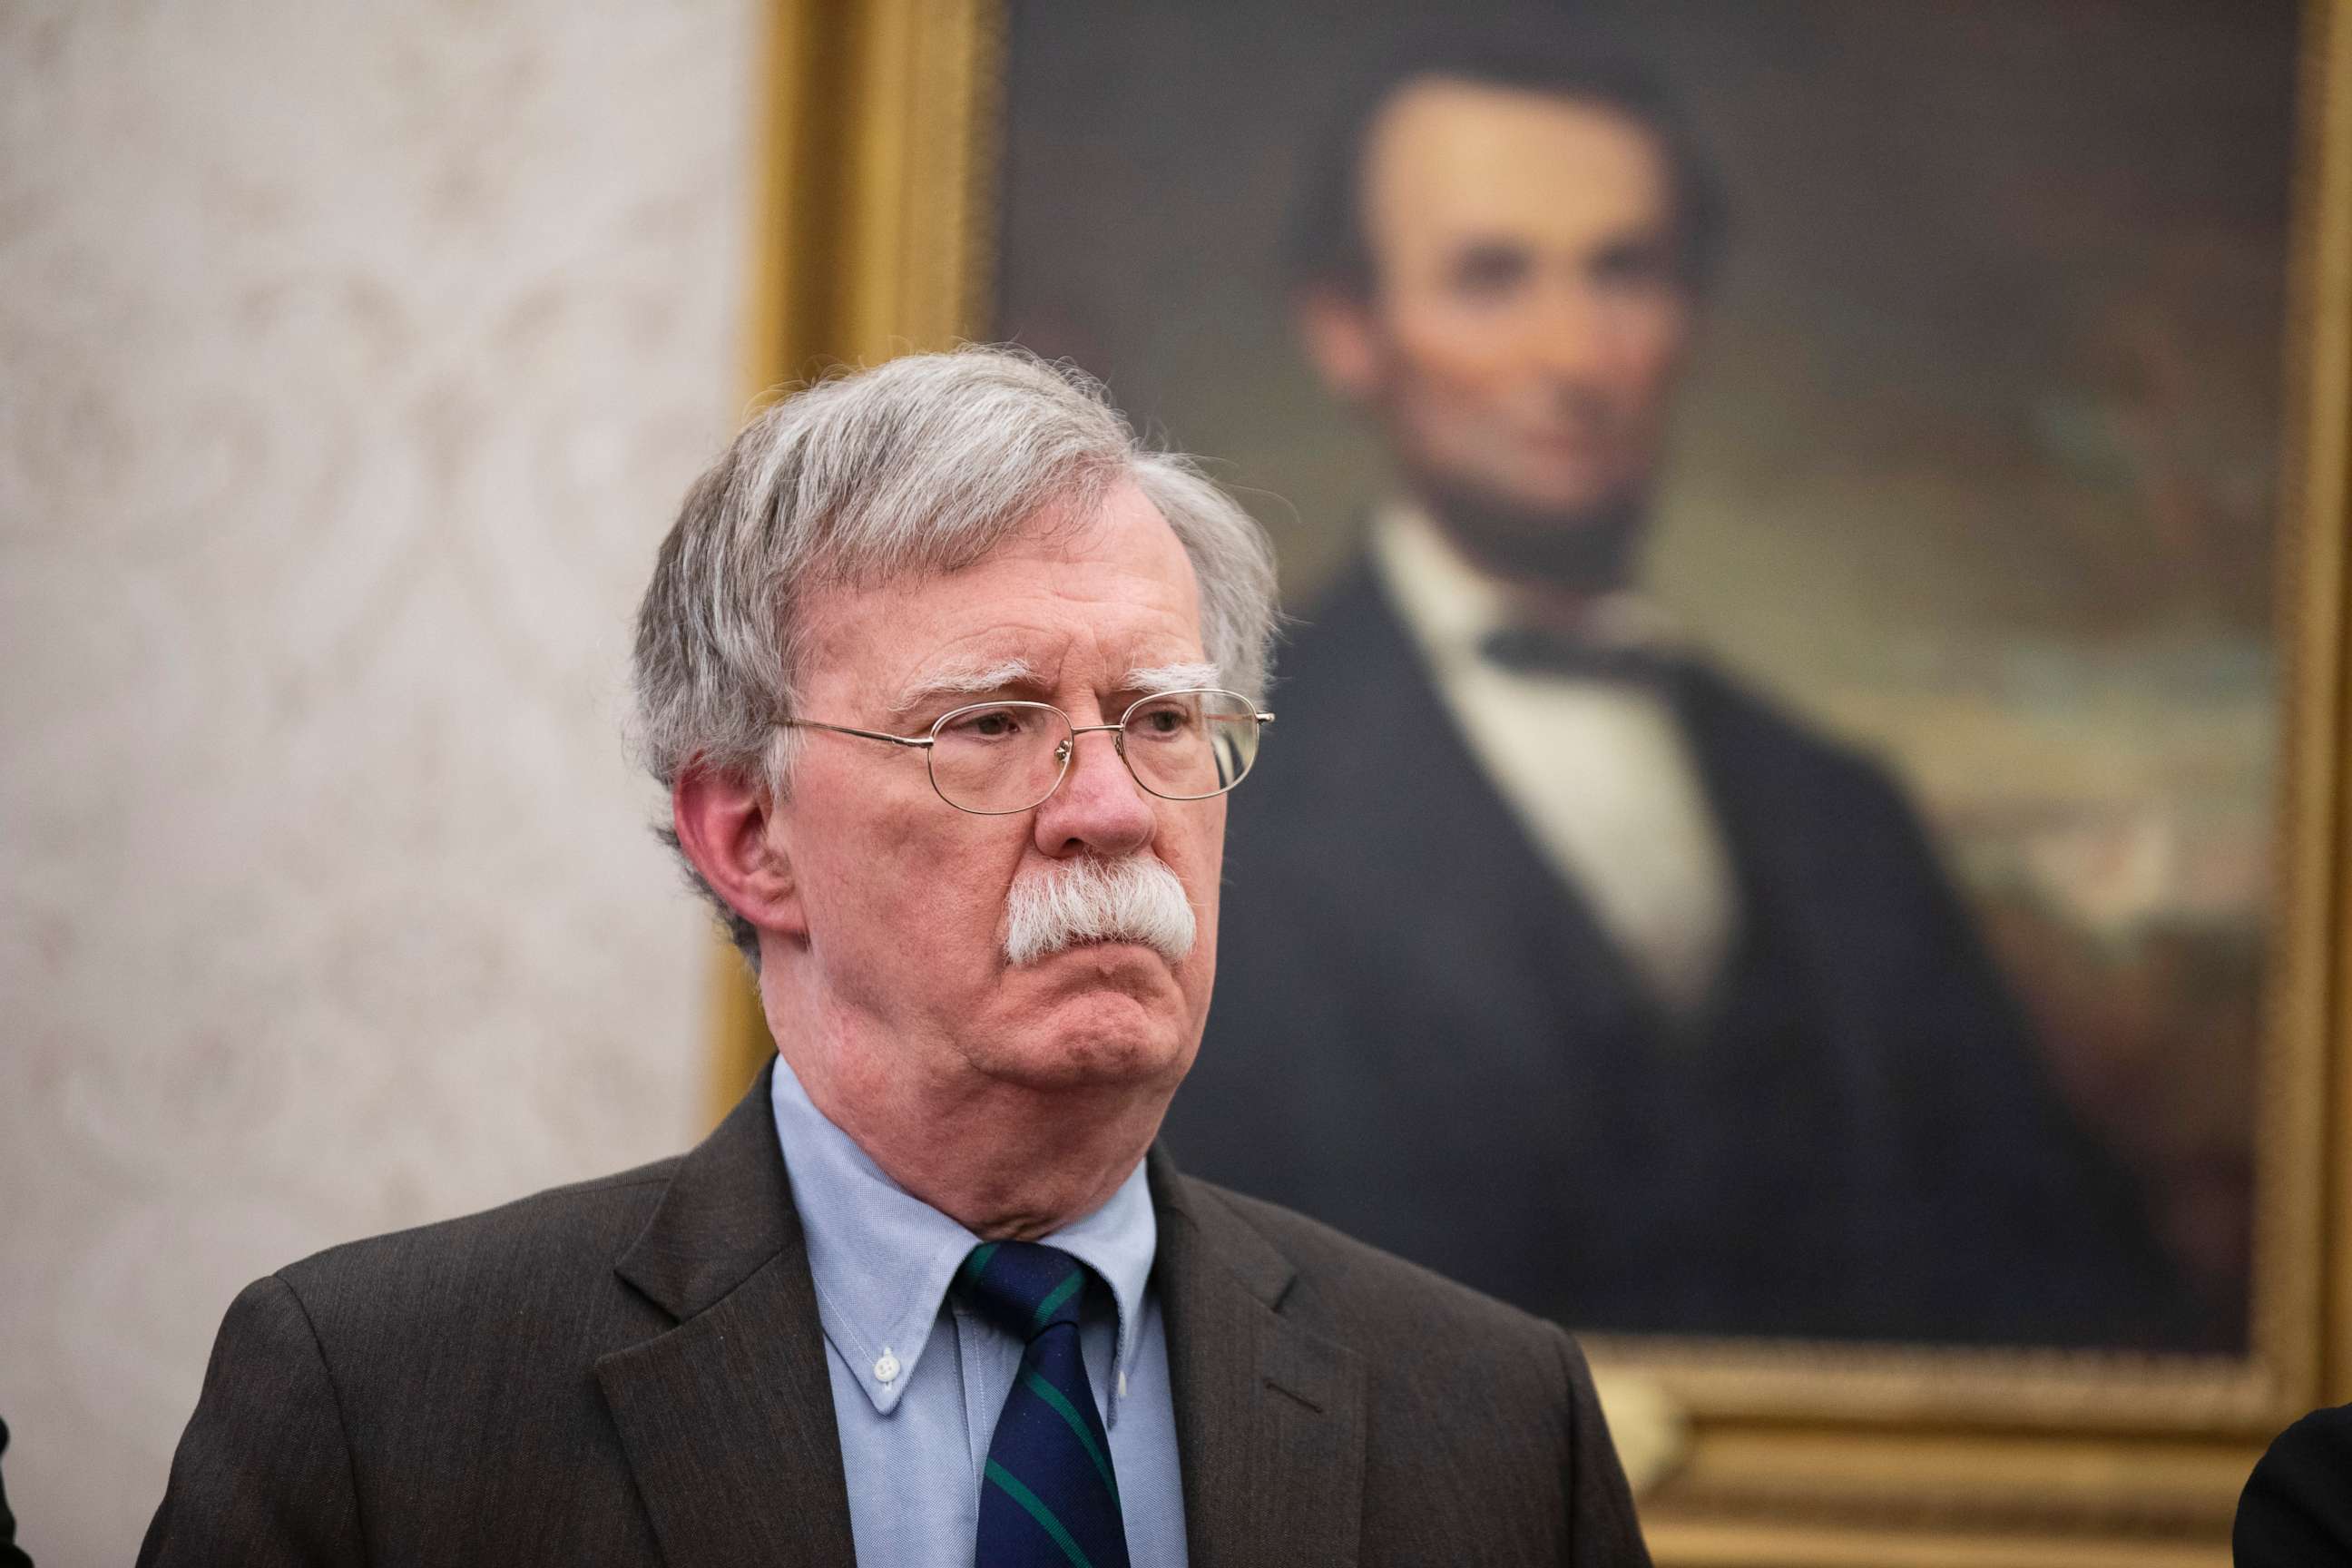 PHOTO: National Security Adviser John Bolton looks on an event in the Oval Office of the White House, in Washington, D.C., Feb. 19, 2019.